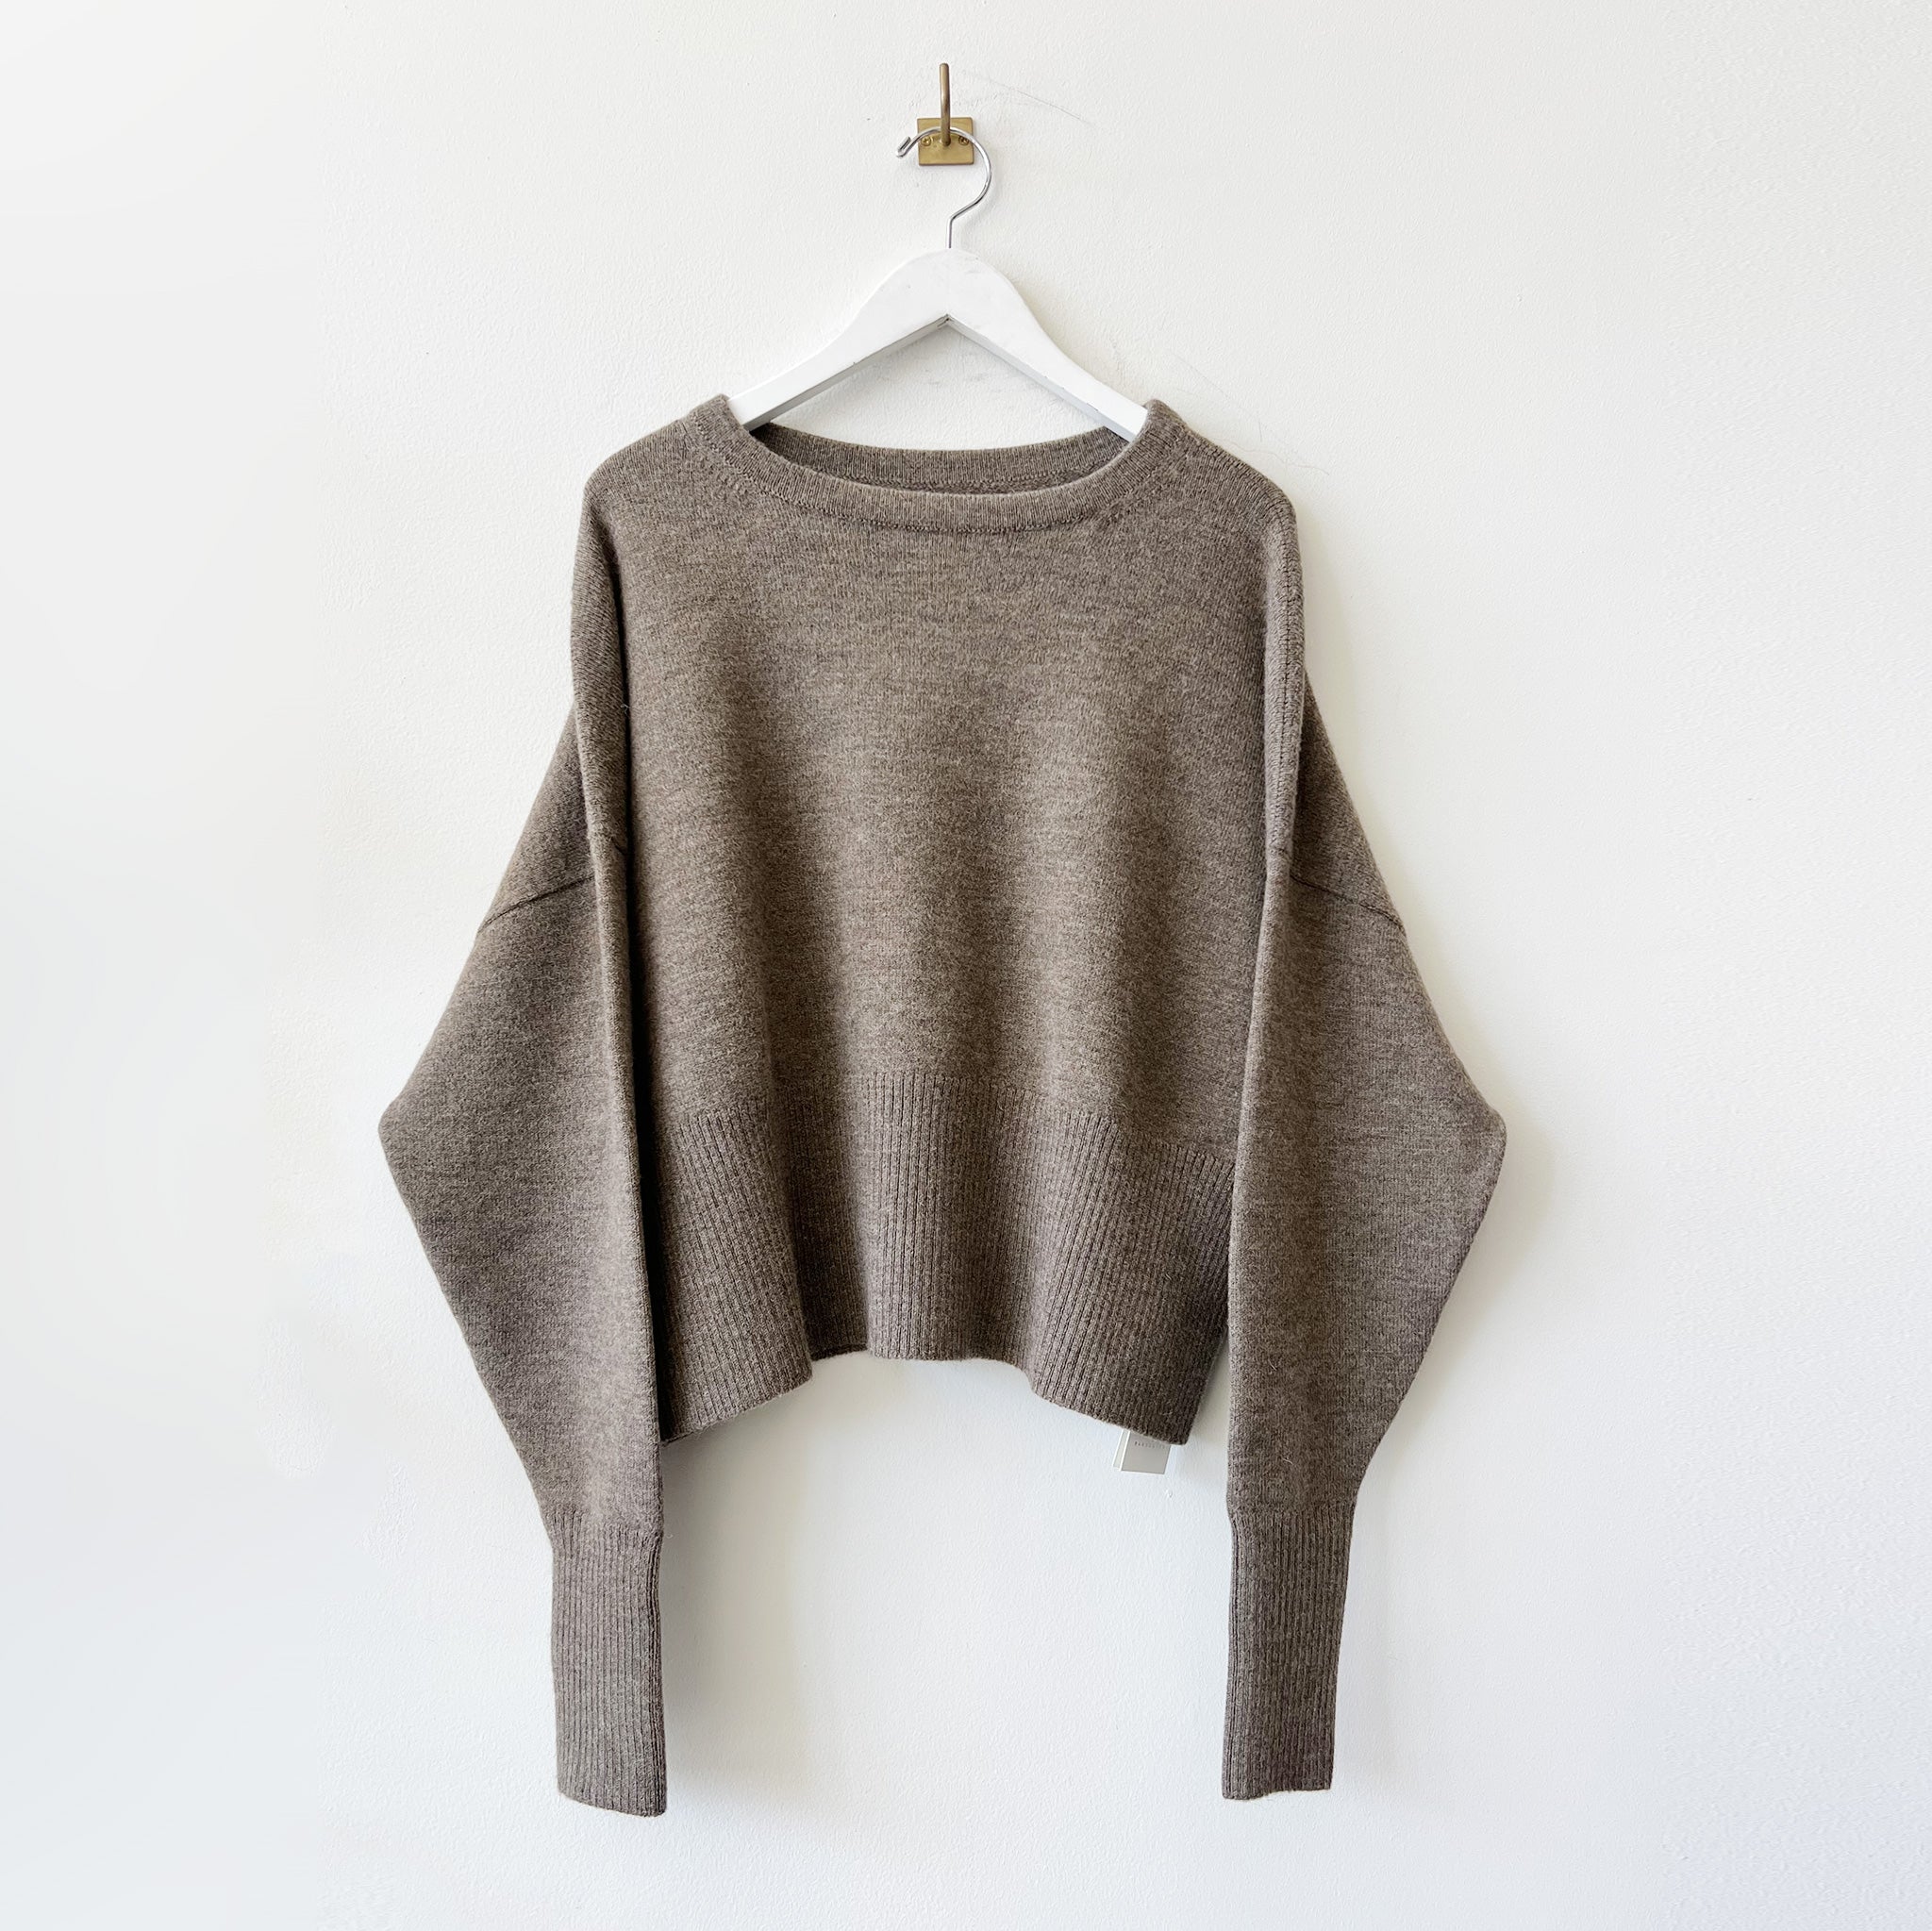 A boxy crewneck sweater with long loose sleeves and a cropped waist.